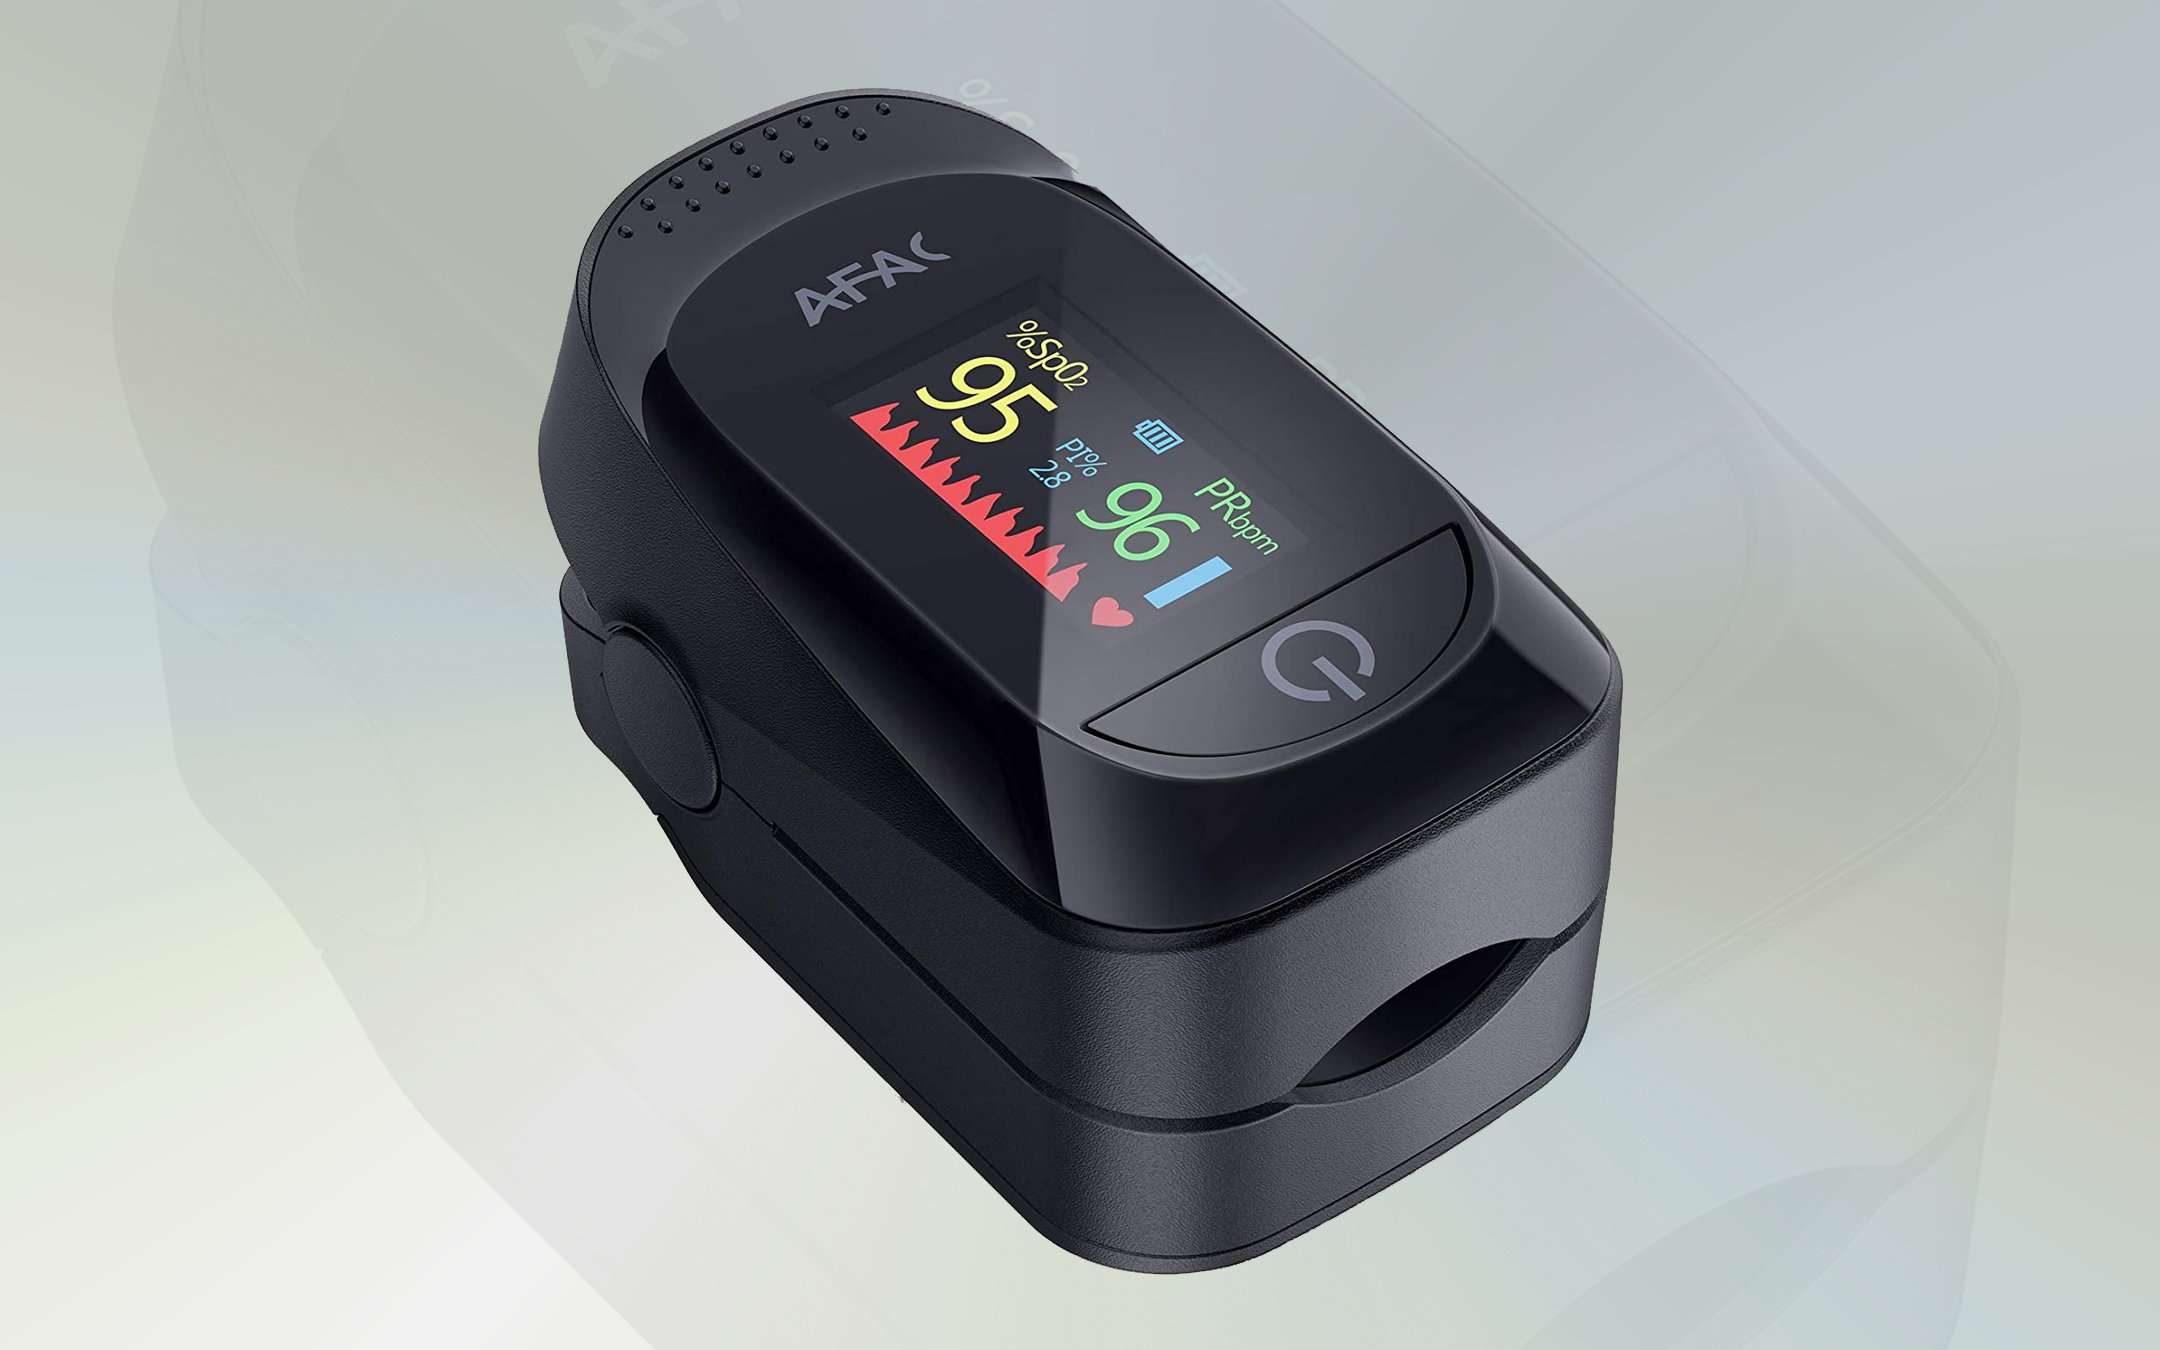 Pulse oximeter, masks, thermometer: discounts and caution